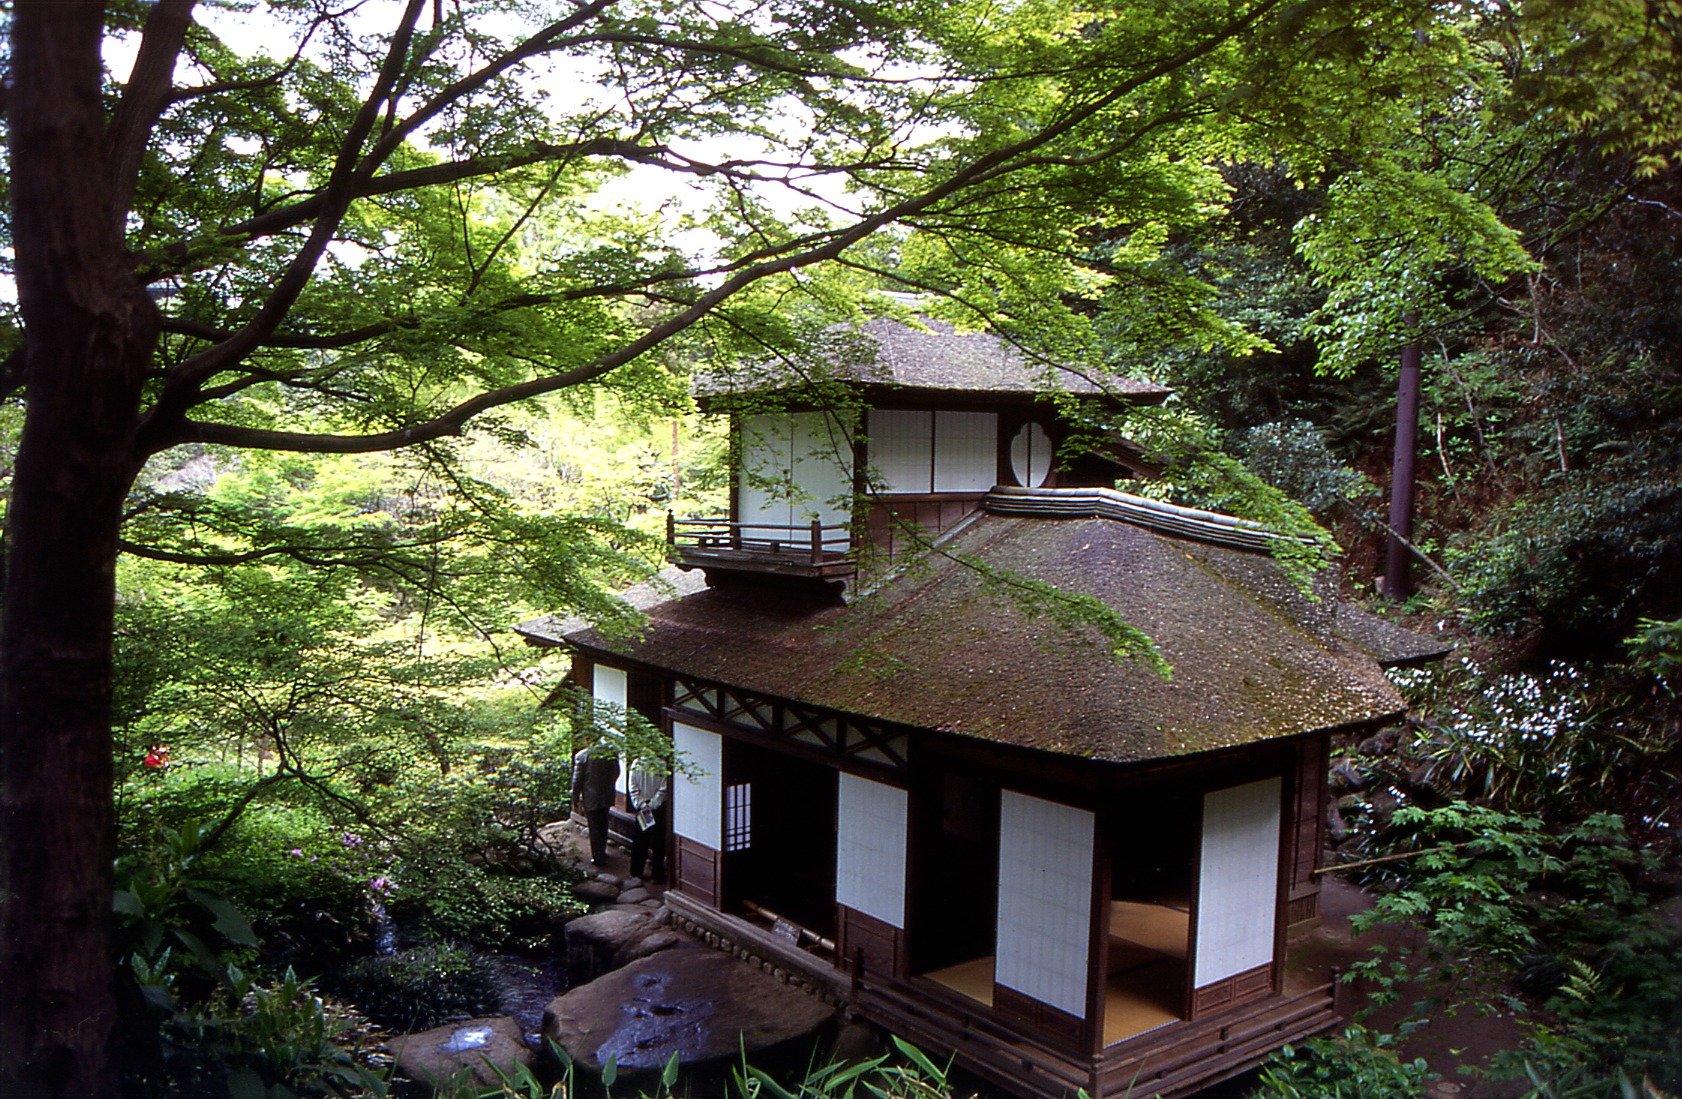 <Canceled>Historical buildings to open to the public in the spring (Shunsoro and Choshukaku, important cultural assets) 2020